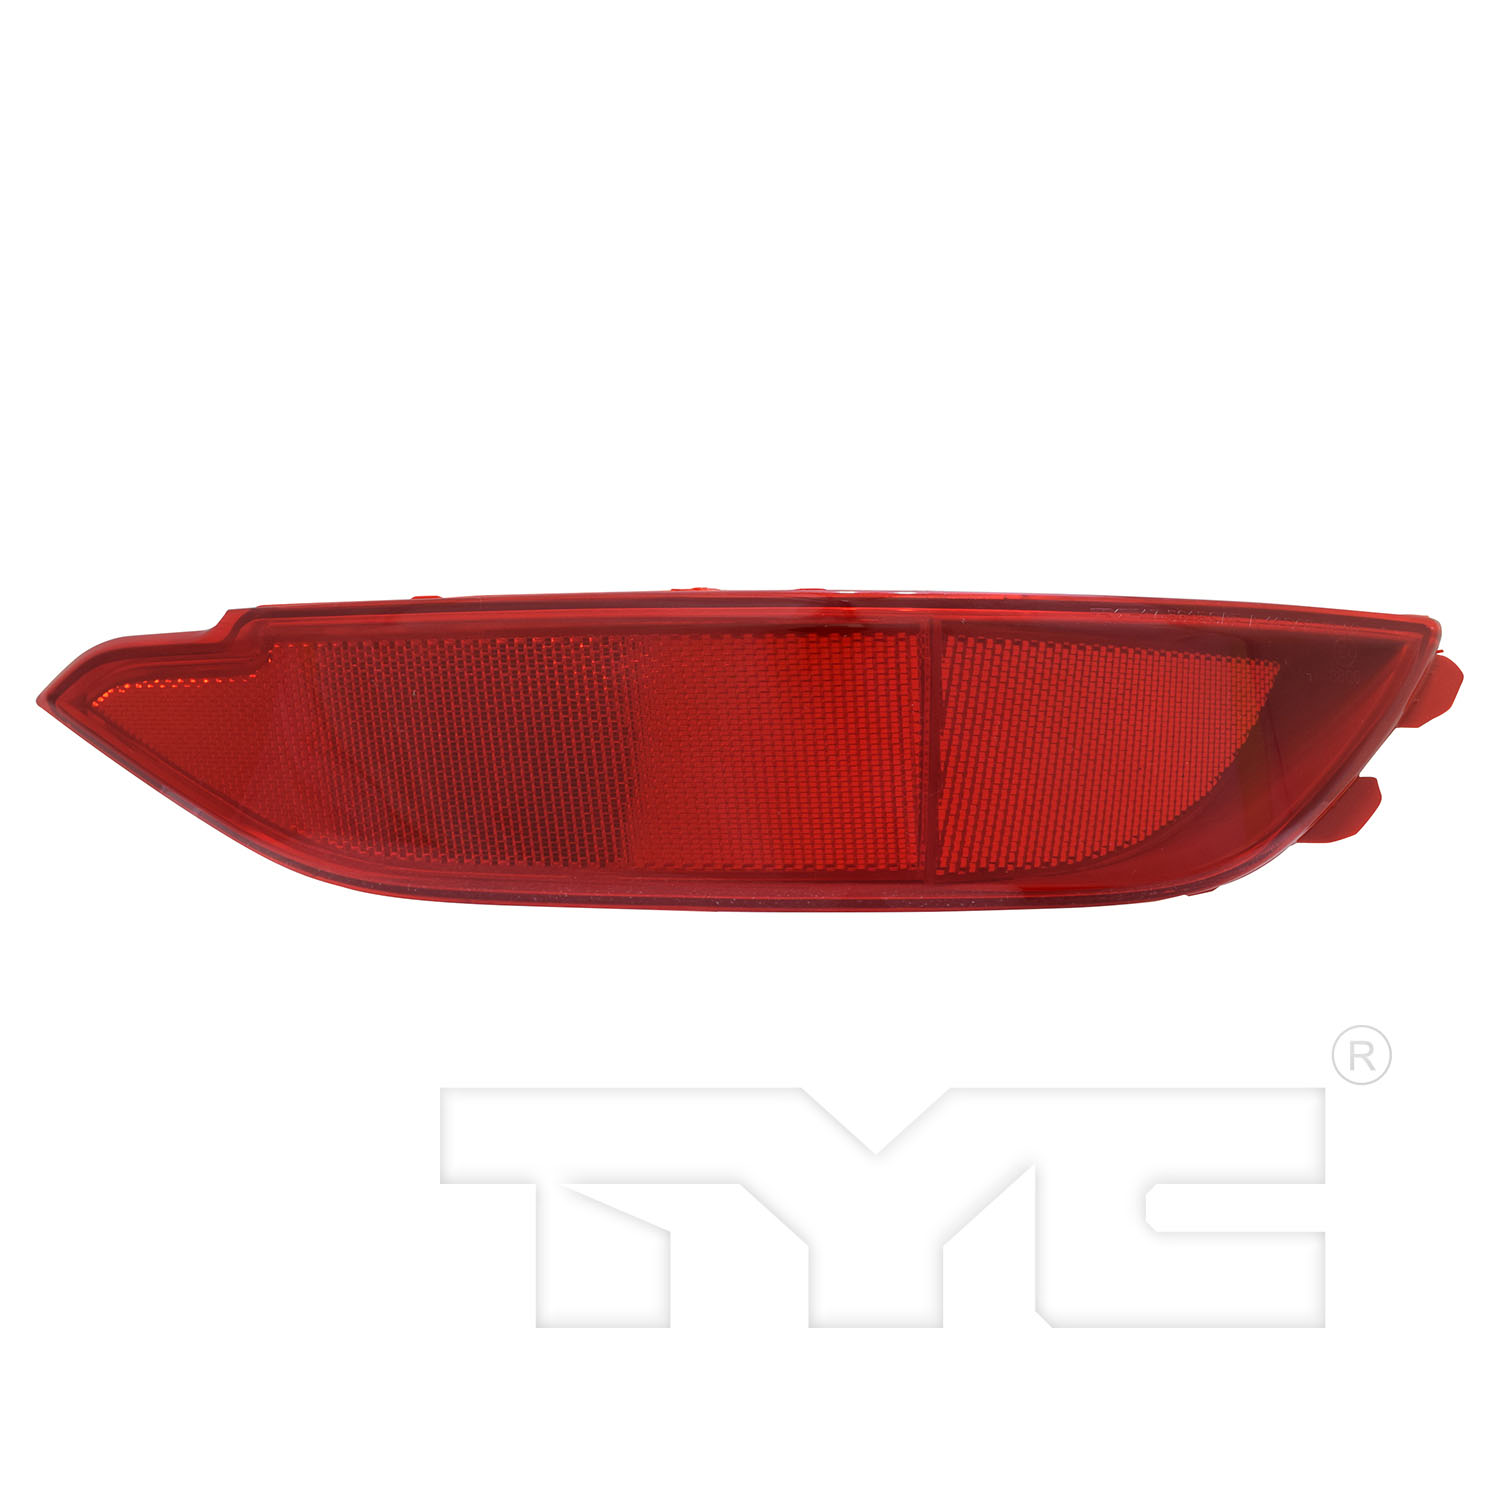 Aftermarket LAMPS for HYUNDAI - TUCSON, TUCSON,16-18,RT Rear bumper reflector